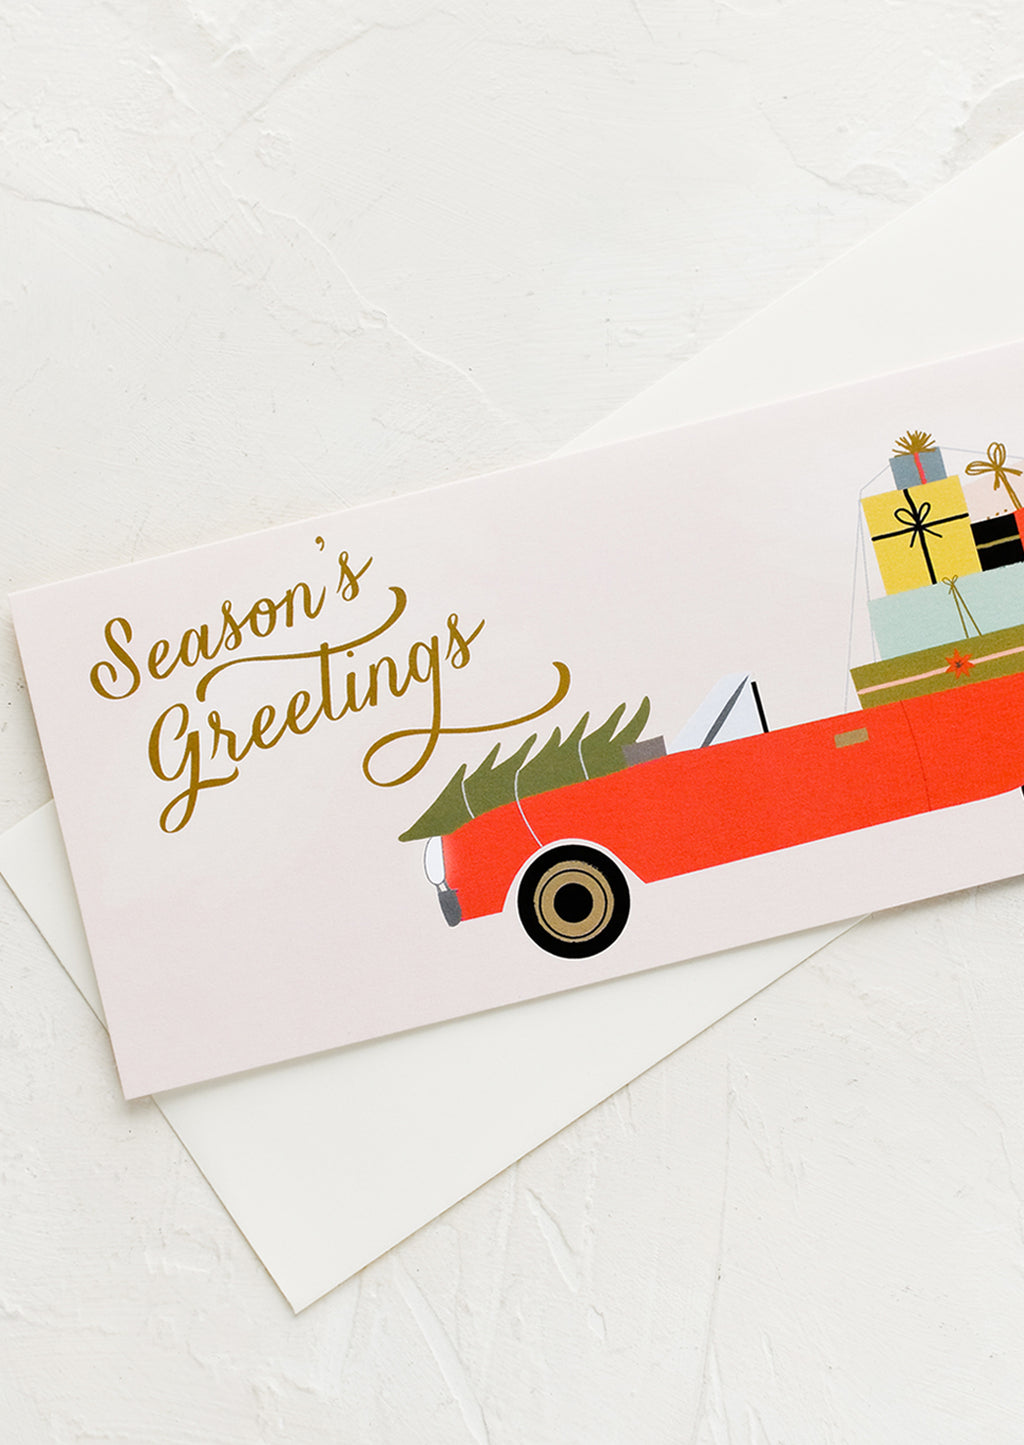 Single Card: Rectangular greeting cards with car full of presents, text reads "Season's greetings".